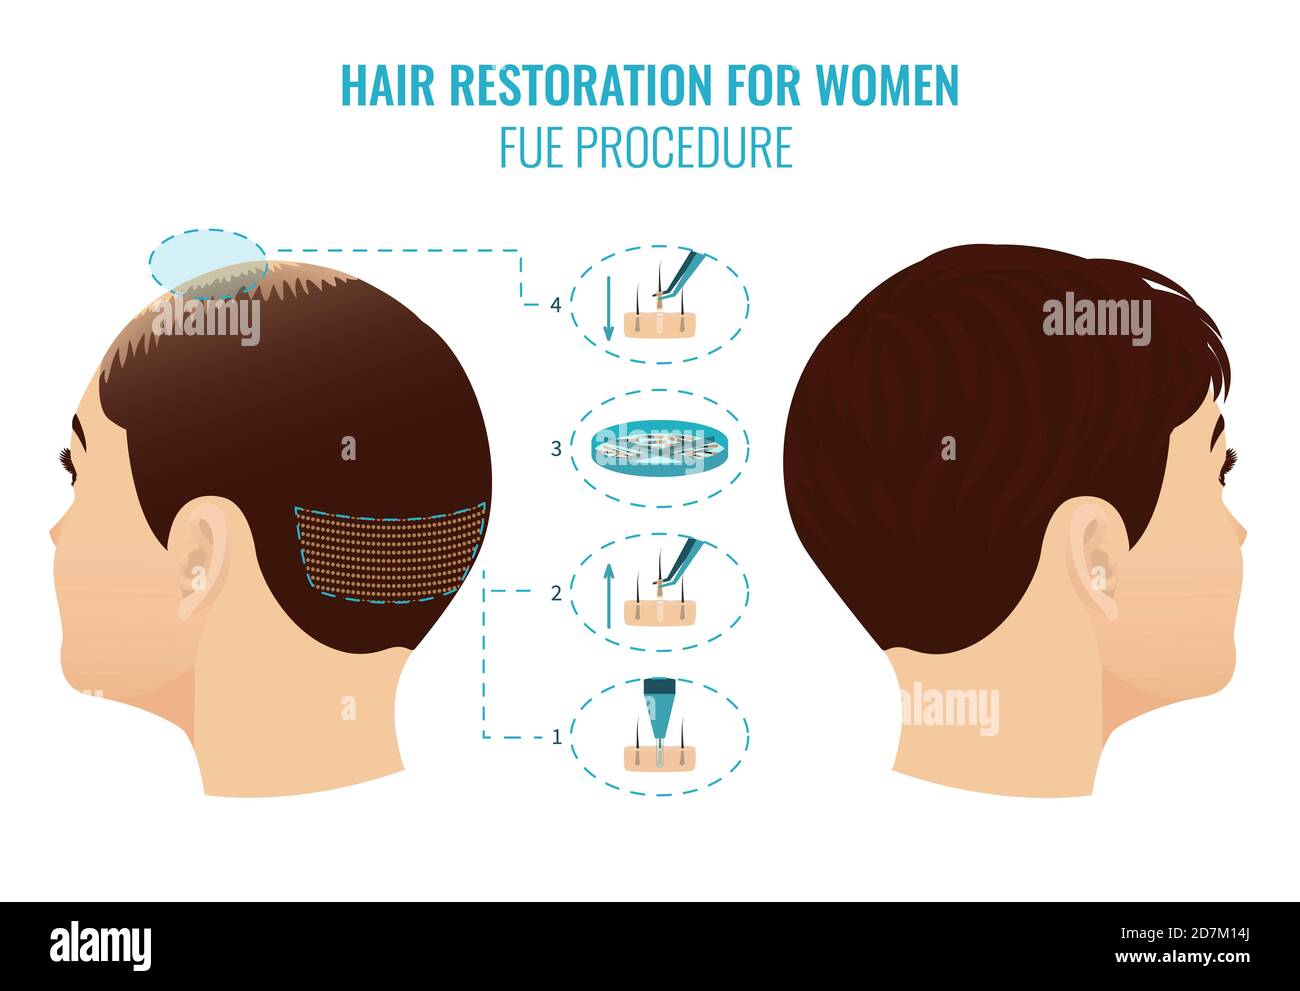 Illustration of female hair loss treatment with follicular unit extraction (FUE). Stages of FUE procedure for women. Stock Photo